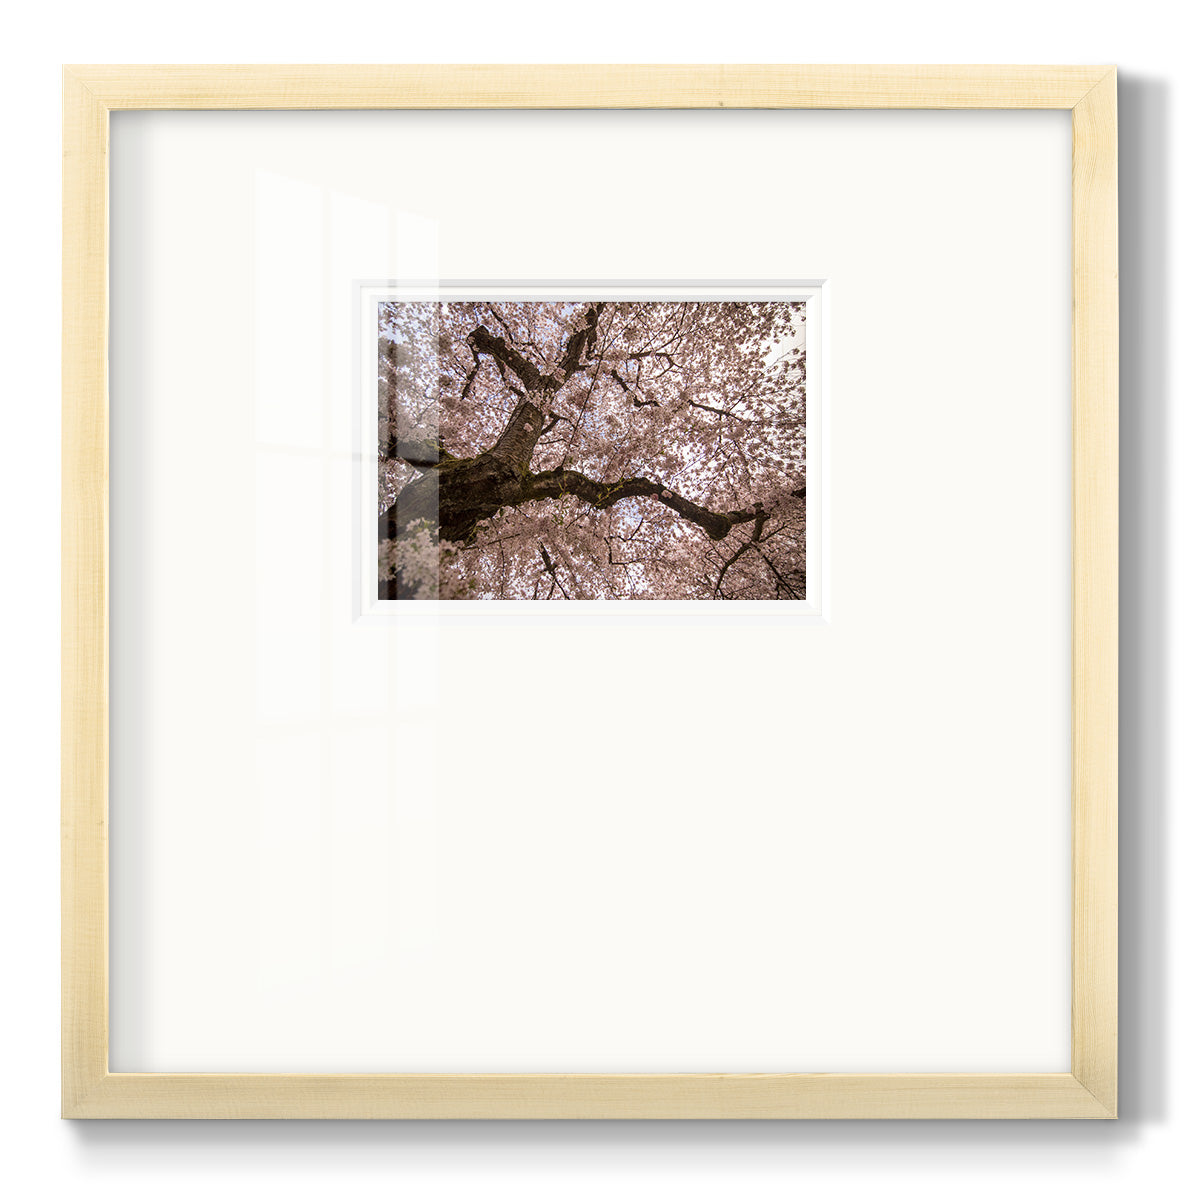 Spring's Arrival- Premium Framed Print Double Matboard